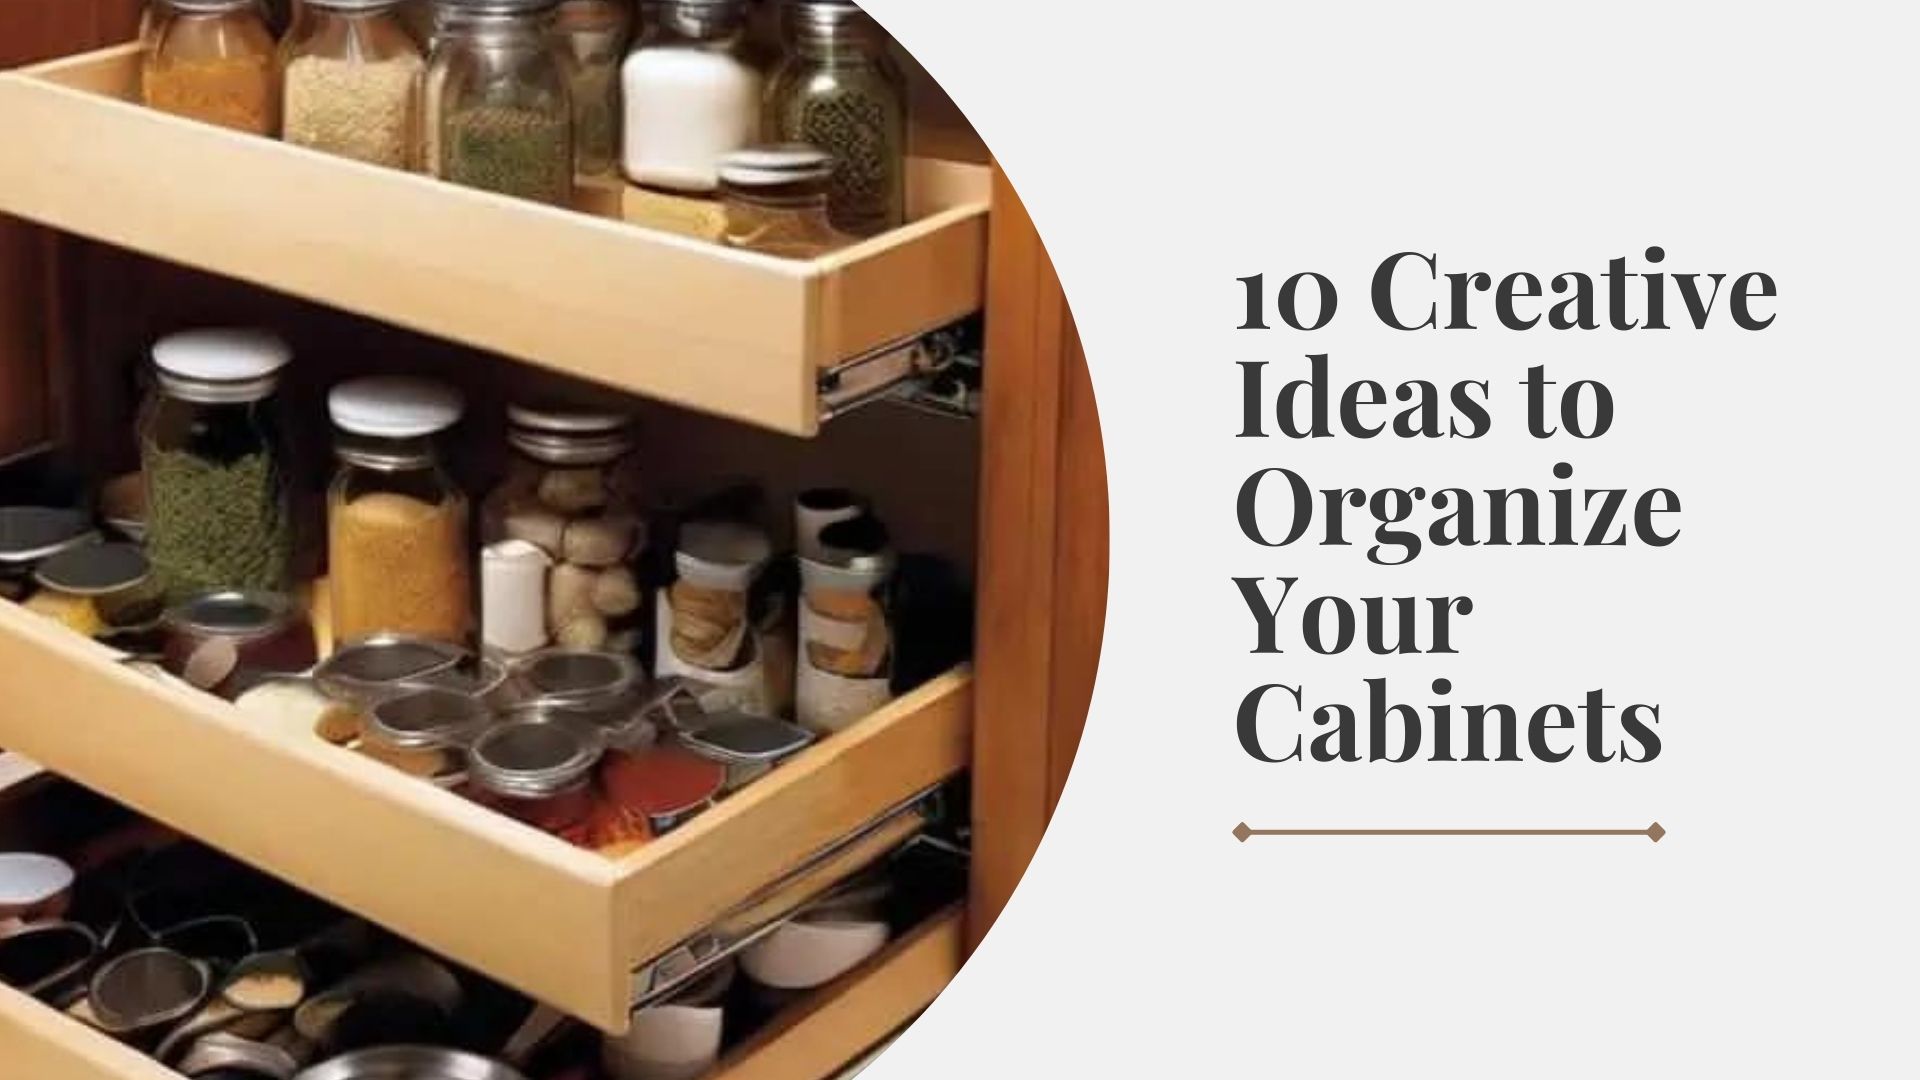 10 Creative Ideas to Organize Your Cabinets